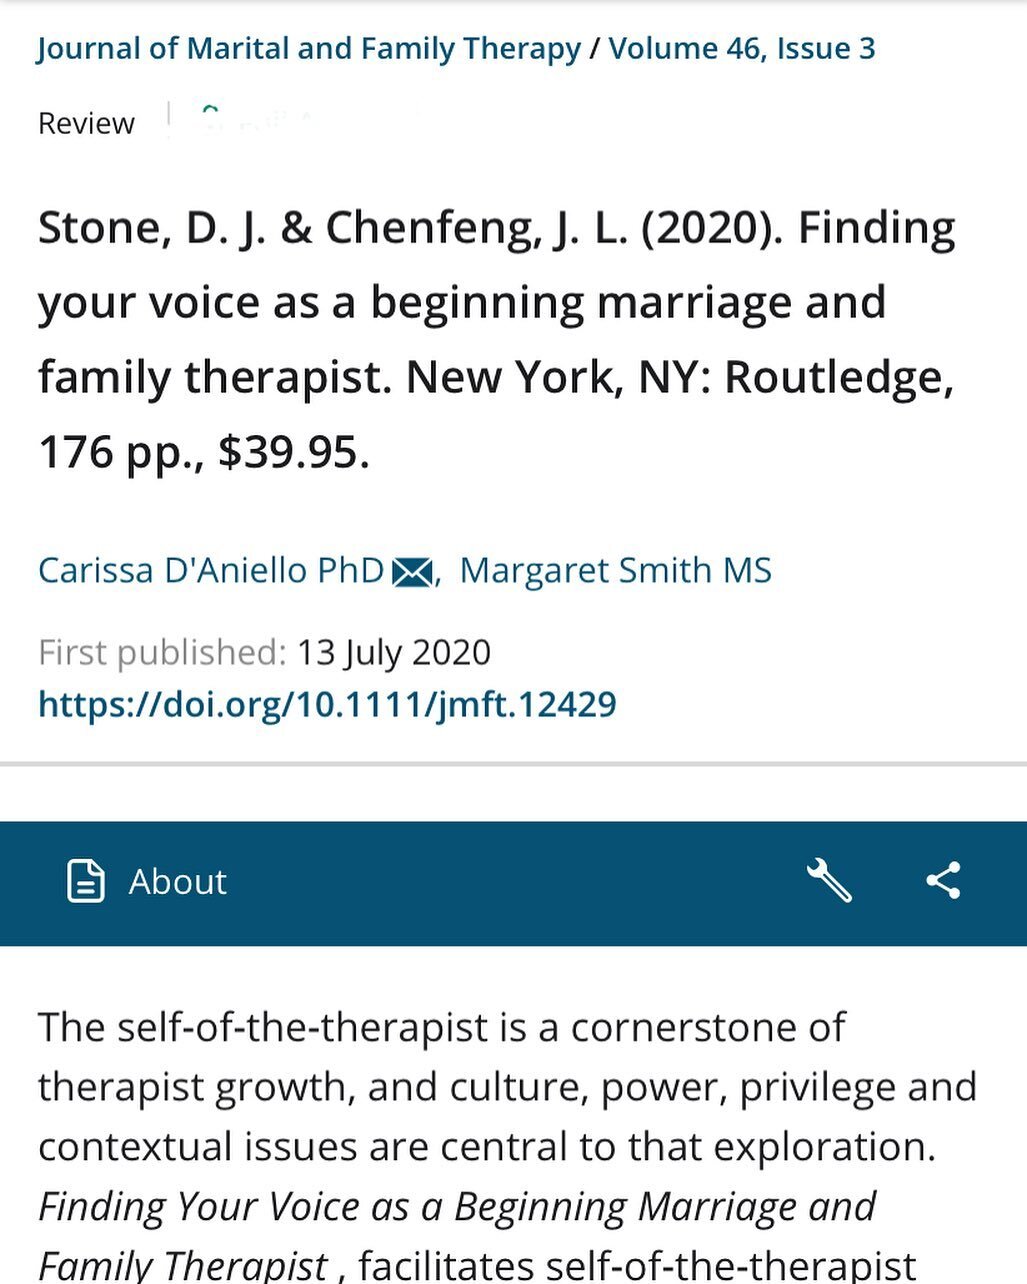 One of our first journal reviews in the Journal of Marital and Family Therapy. If you are considering our book you can read D&rsquo;Aniello and Smith&rsquo;s review here: https://onlinelibrary.wiley.com/doi/epdf/10.1111/jmft.12429